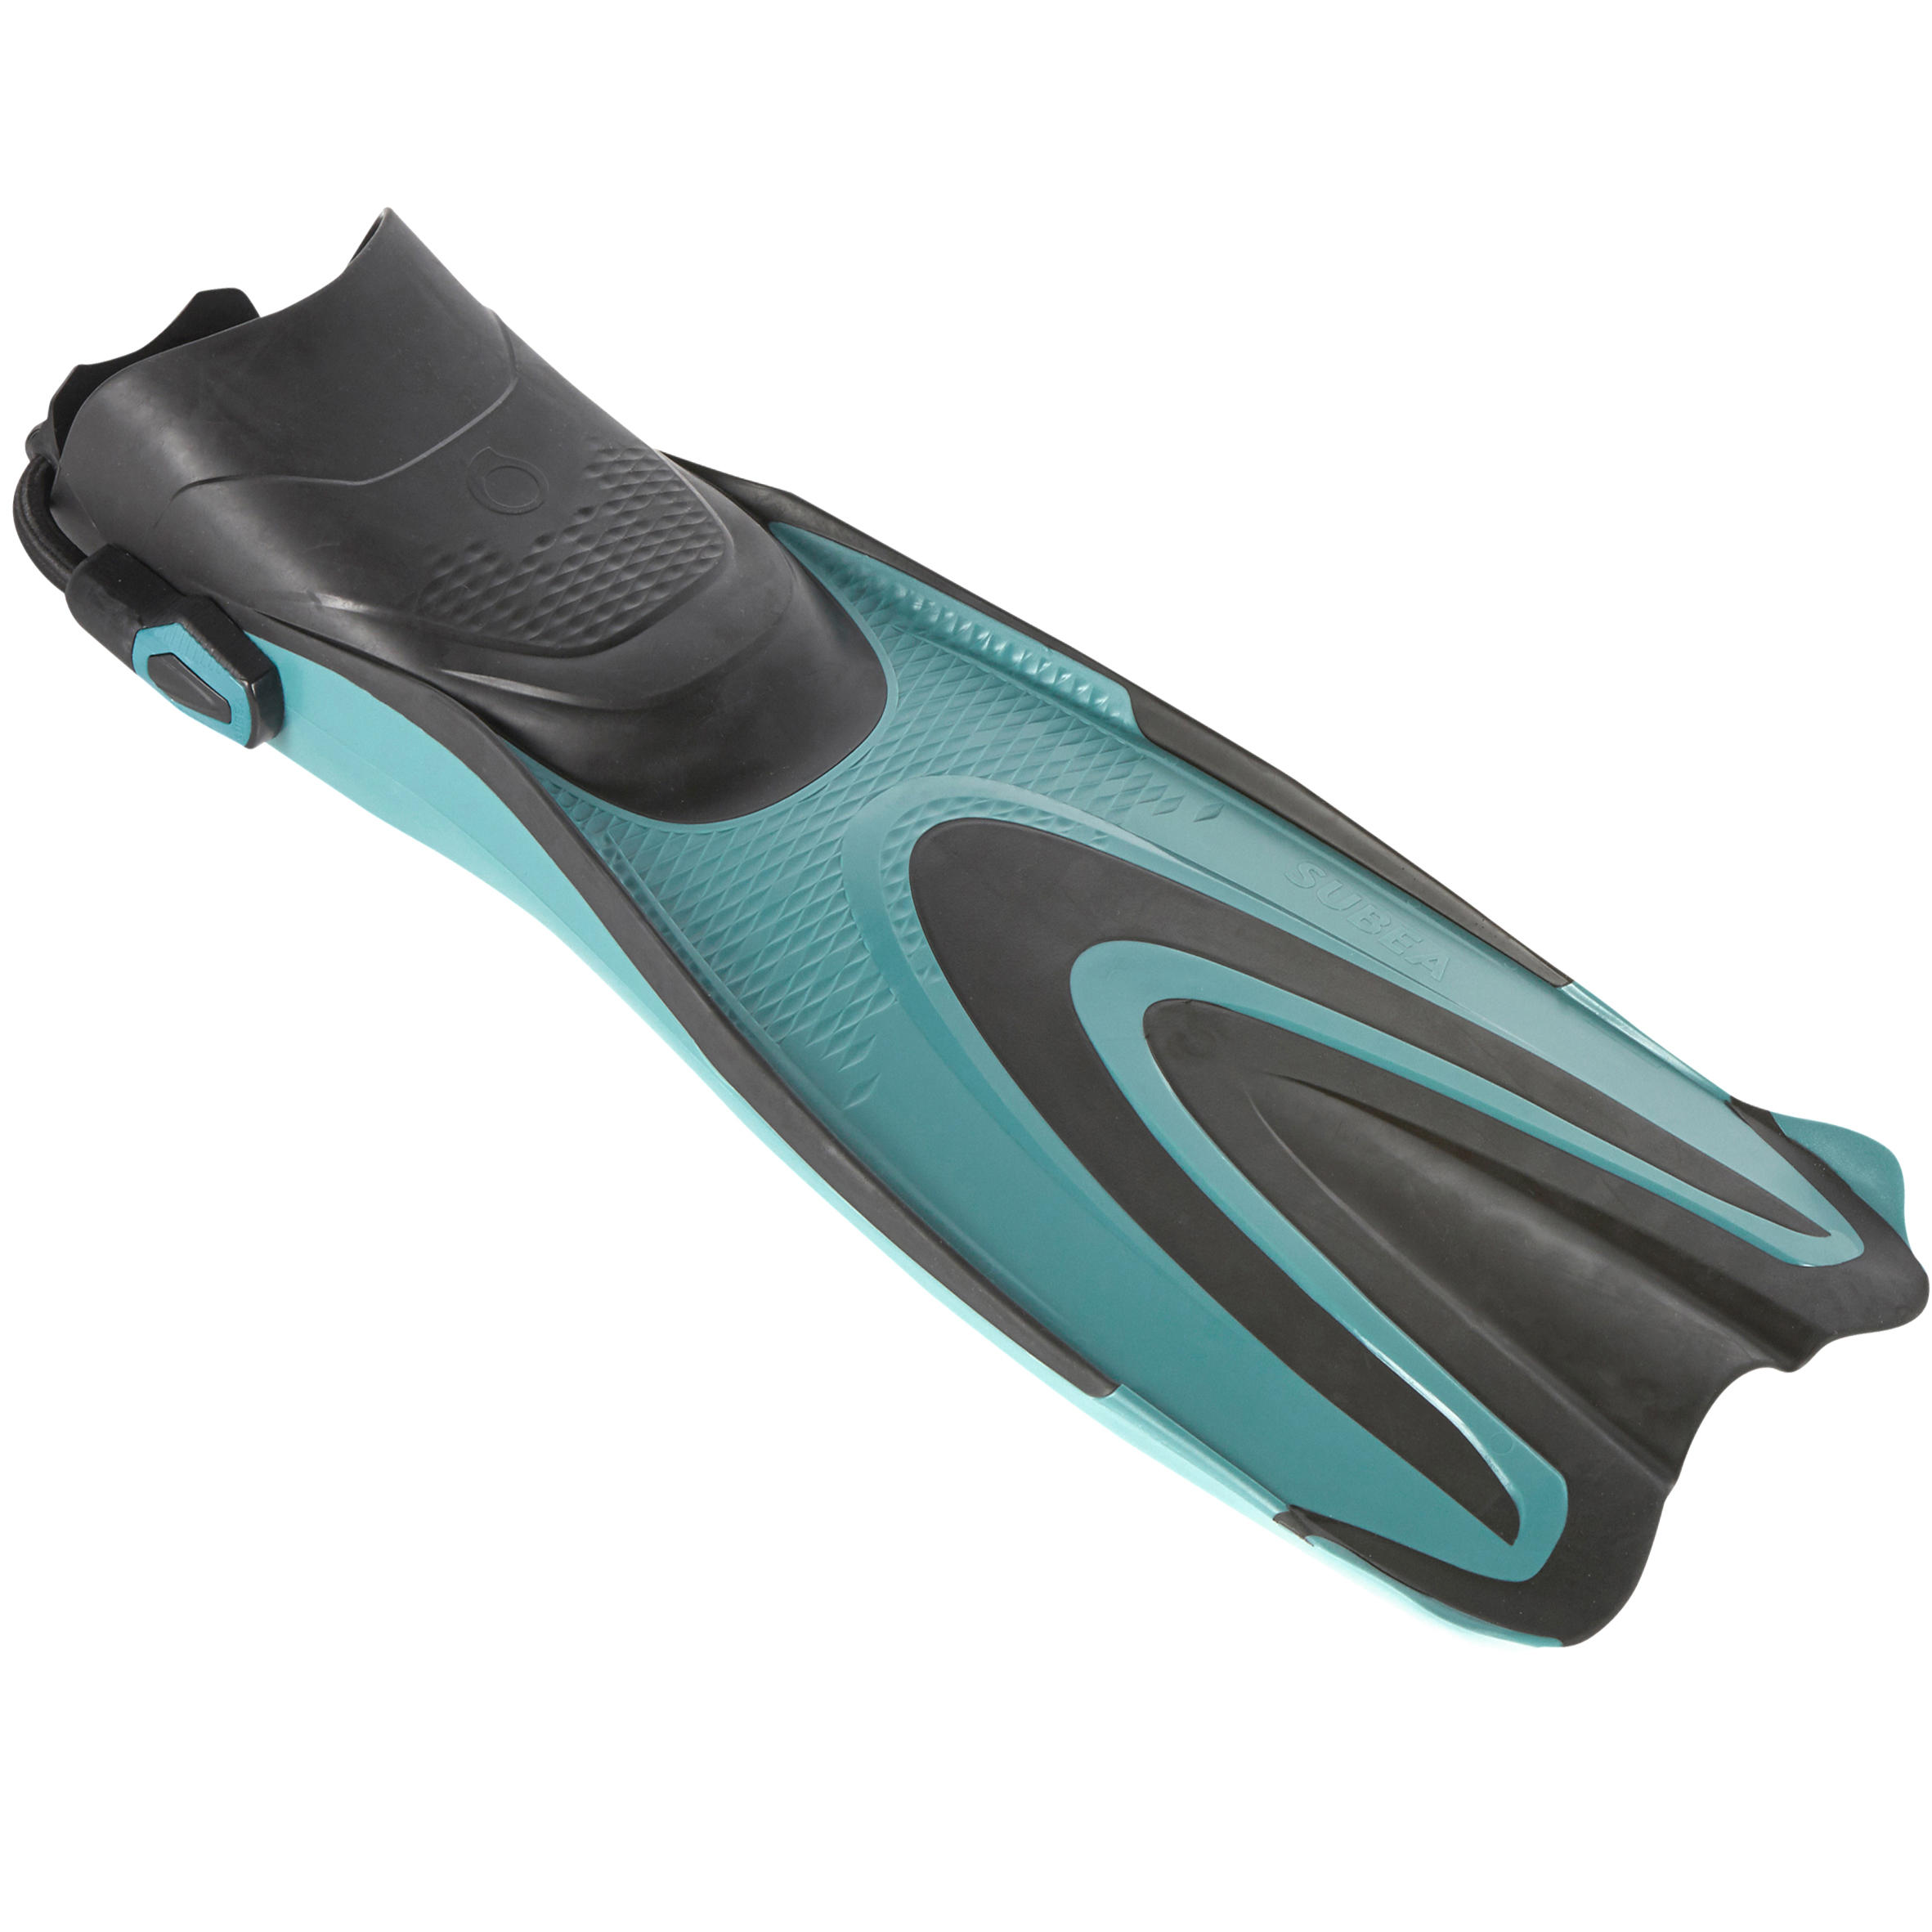 SUBEA Diving fins adjustable OH 500 soft turquoise